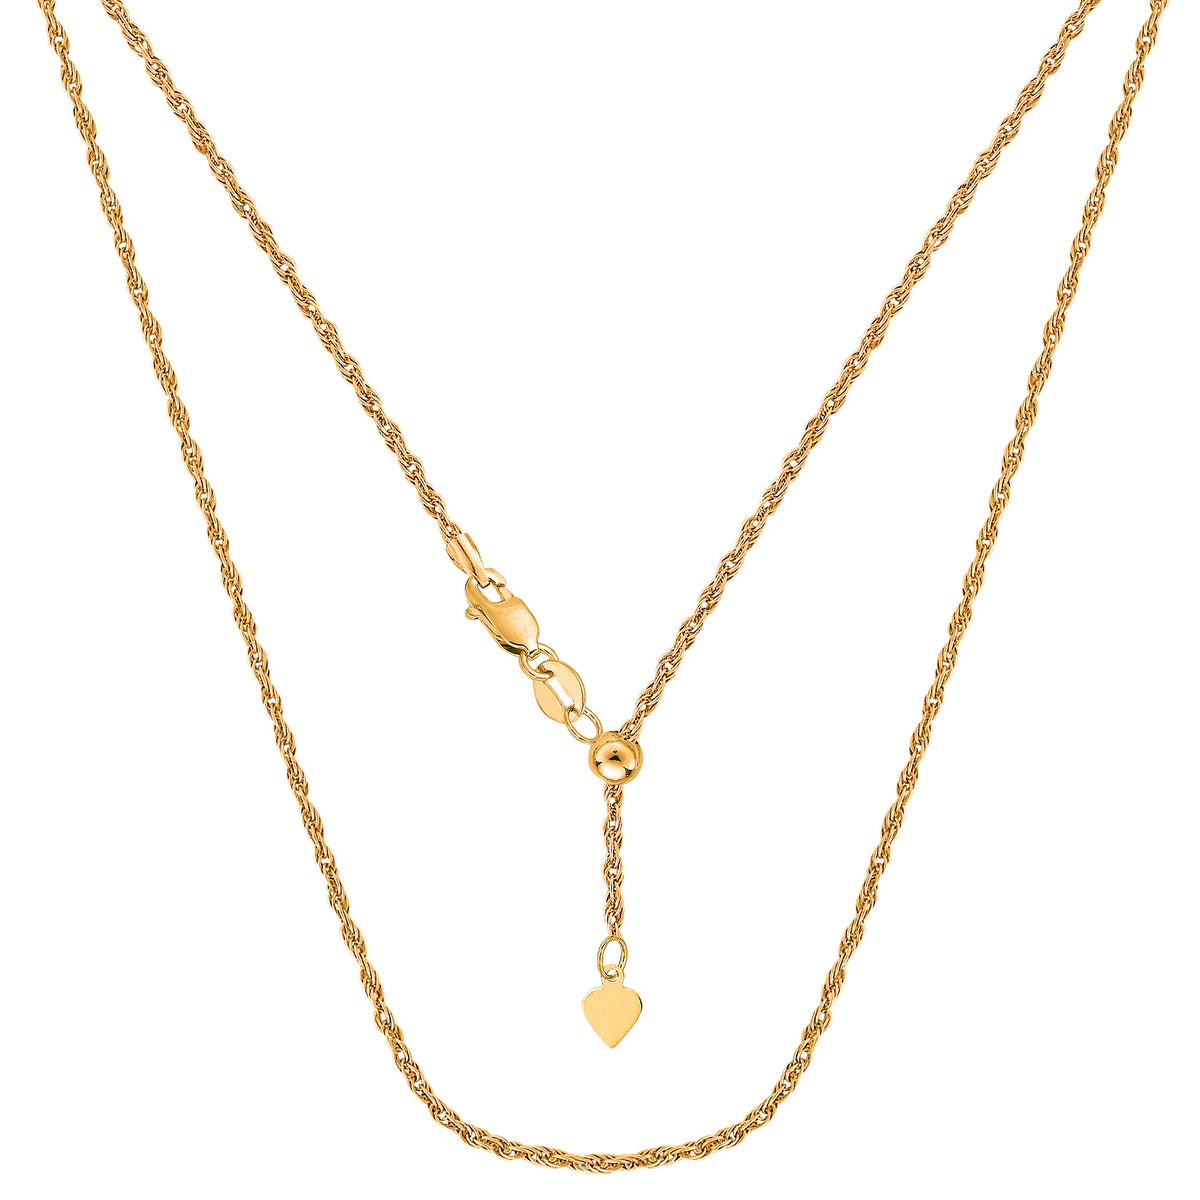 10k Yellow Gold Adjustable Rope Link Chain Necklace, 1.0mm, 22"